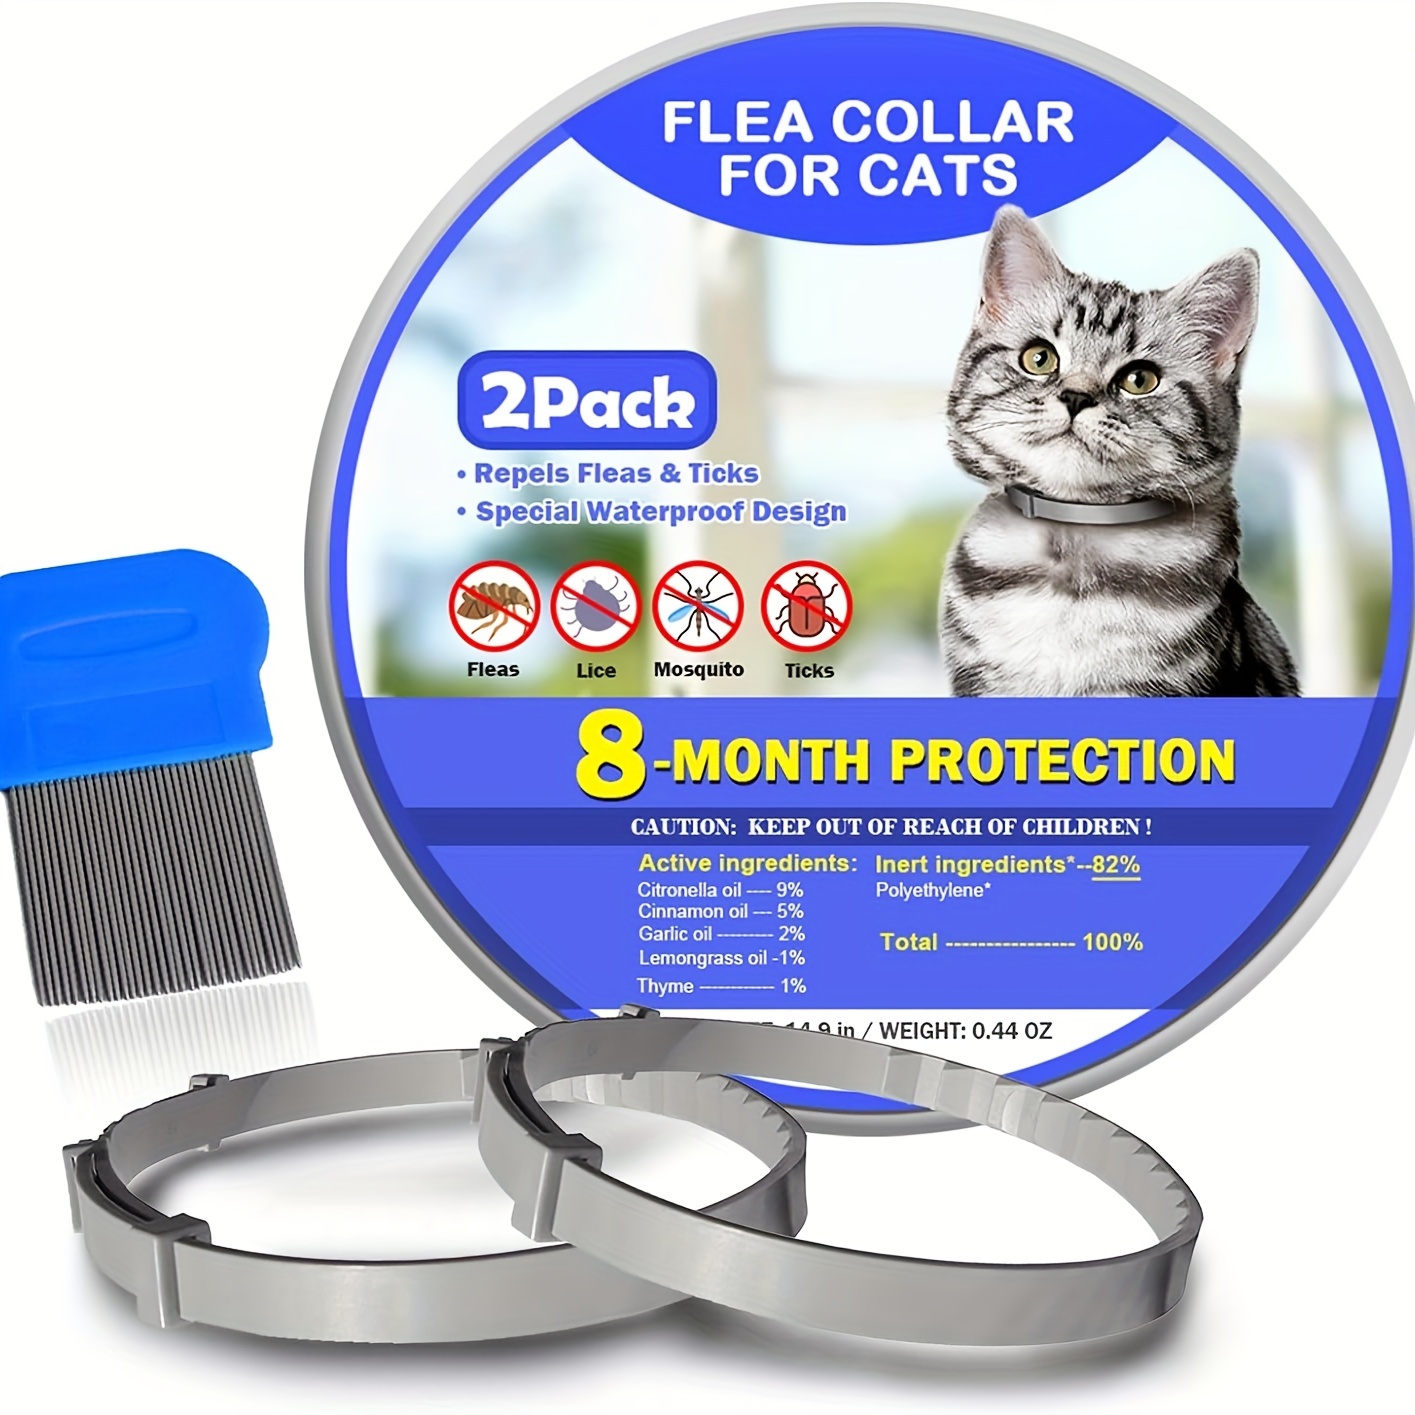 

2pcs Cat Collars For Tick Prevention, Bite Prevention, And Waterproofing | Protects Cats For 8 Months, Providing Long-term Protection For Cats